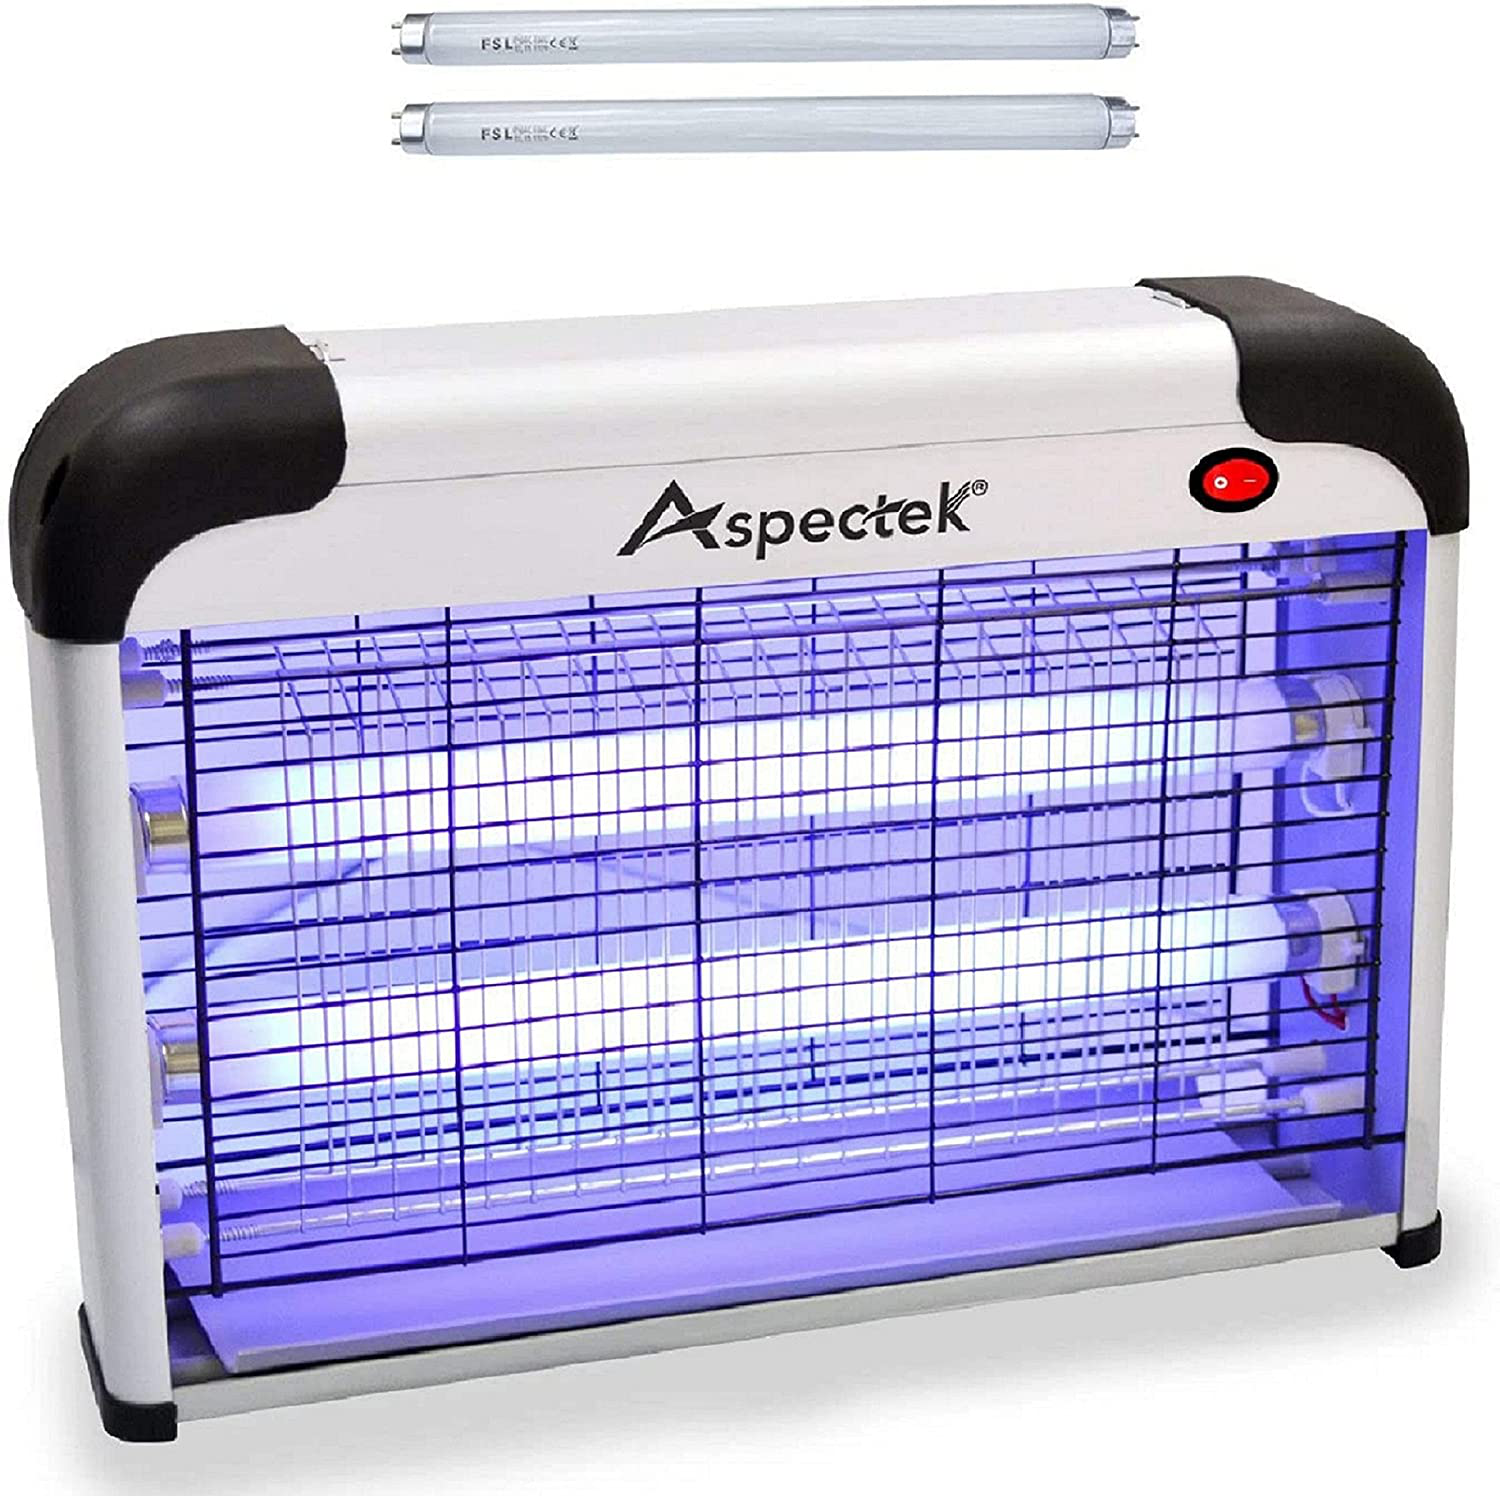 ASPECTEK Powerful 20W Electronic Indoor Insect Killer, Bug Zapper, Fly Zapper, Mosquito Killer-Indoor Use Including Free 2 Pack Replacement Bulbs